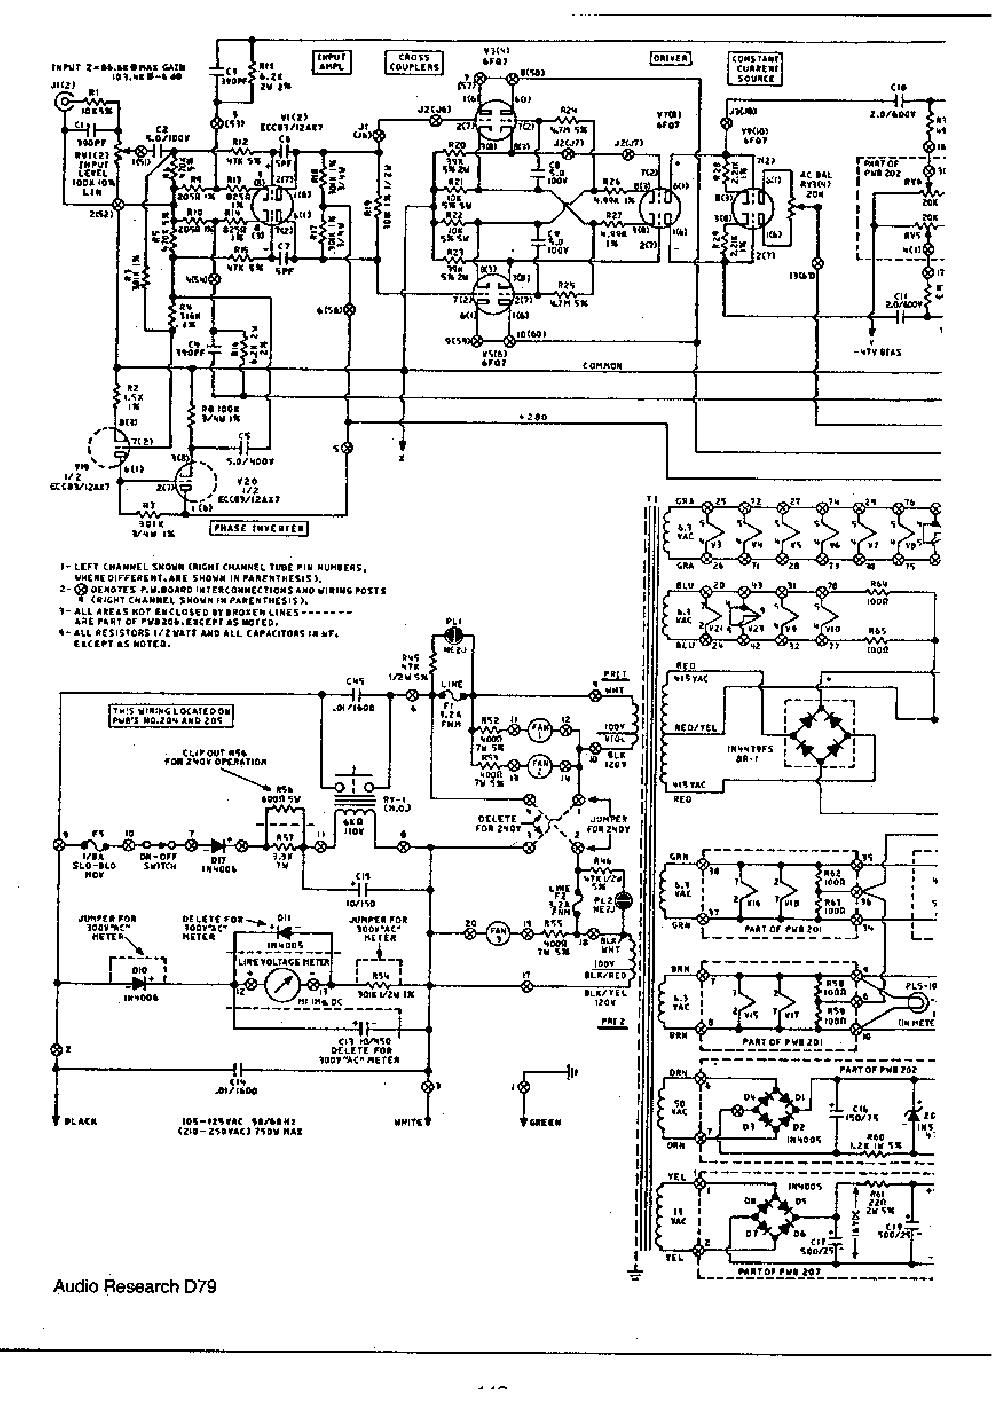 audio research d 79a pwr schematic